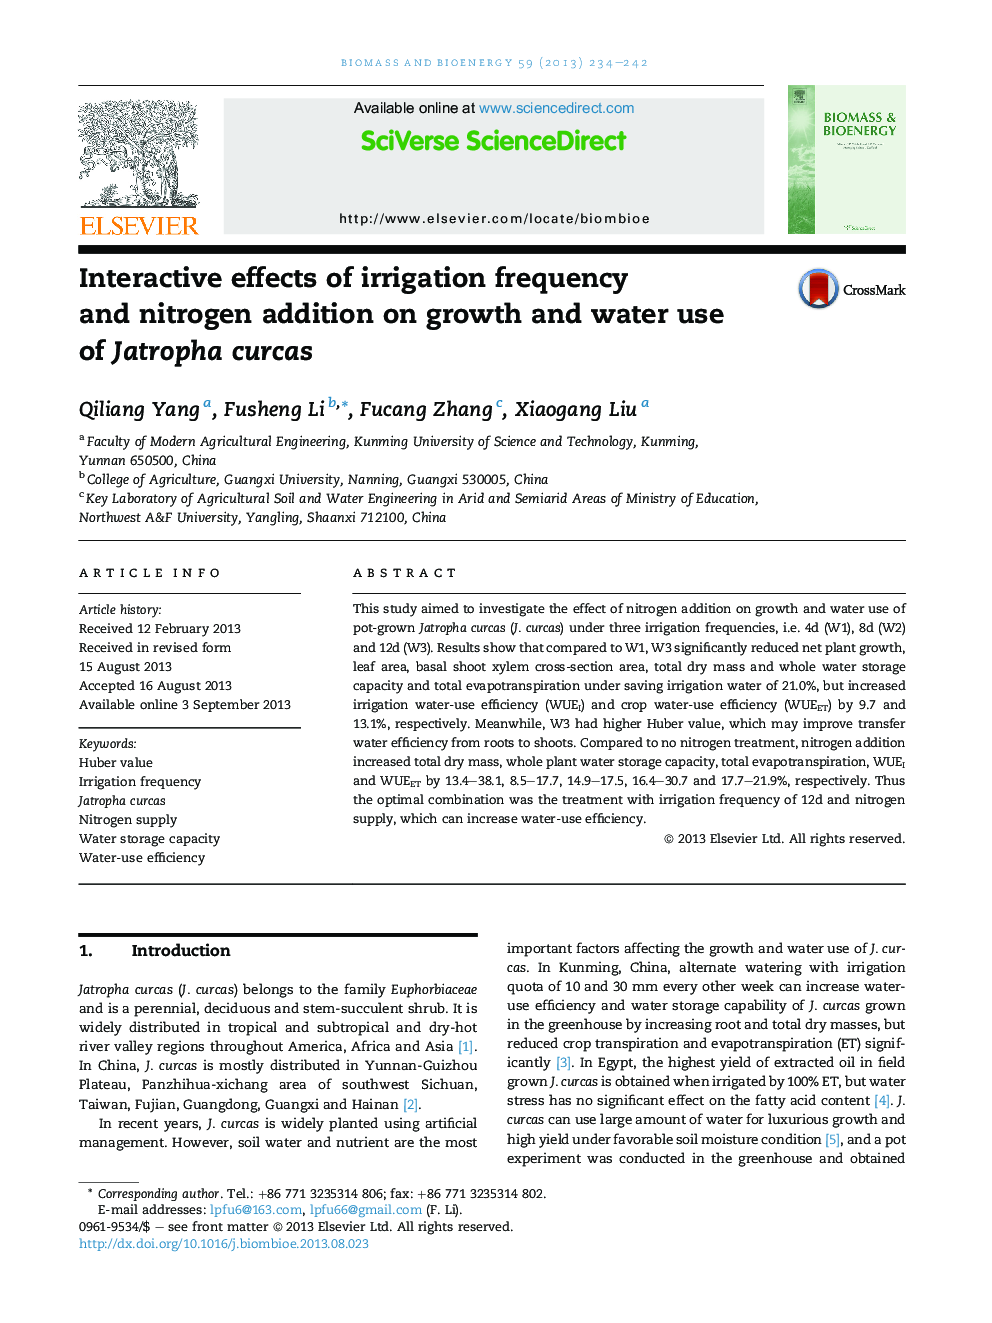 Interactive effects of irrigation frequency and nitrogen addition on growth and water use of Jatropha curcas